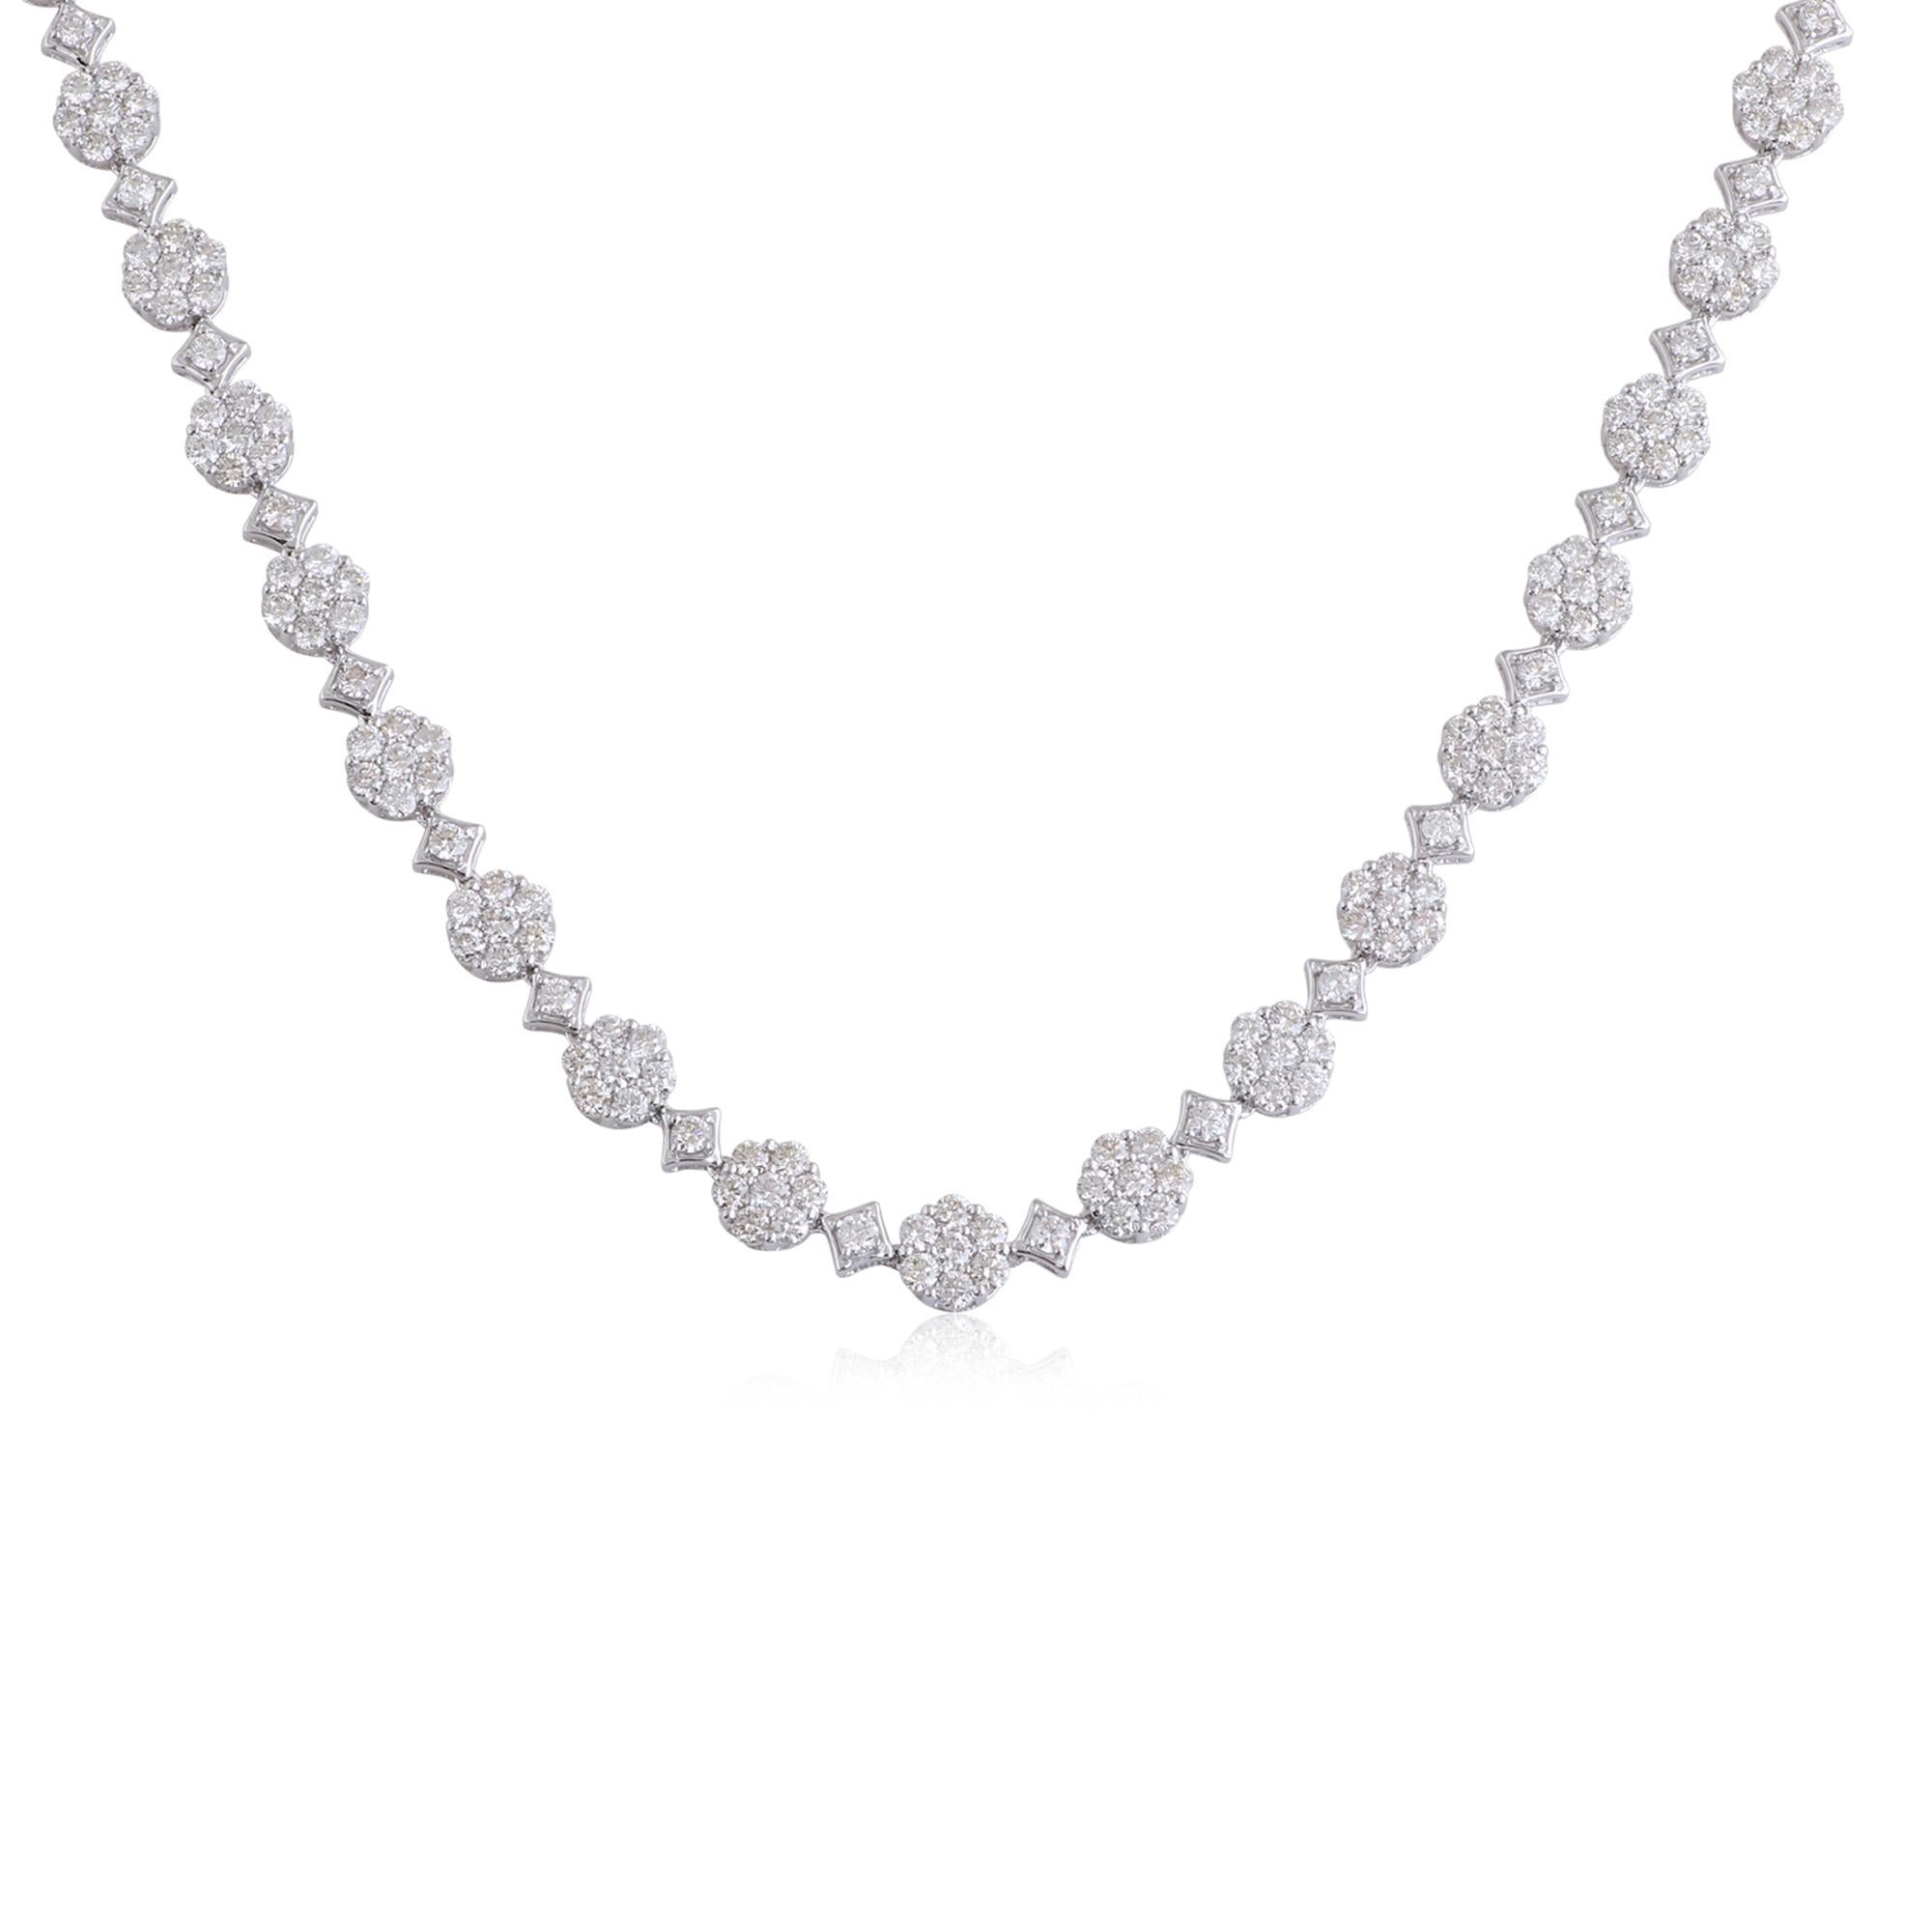 Make a grand and dazzling statement with this exquisite 21.80 Carat SI/HI Diamond Necklace. Handmade with meticulous craftsmanship, this stunning piece of women's jewelry showcases the brilliance and allure of diamonds, set in 14 karat white